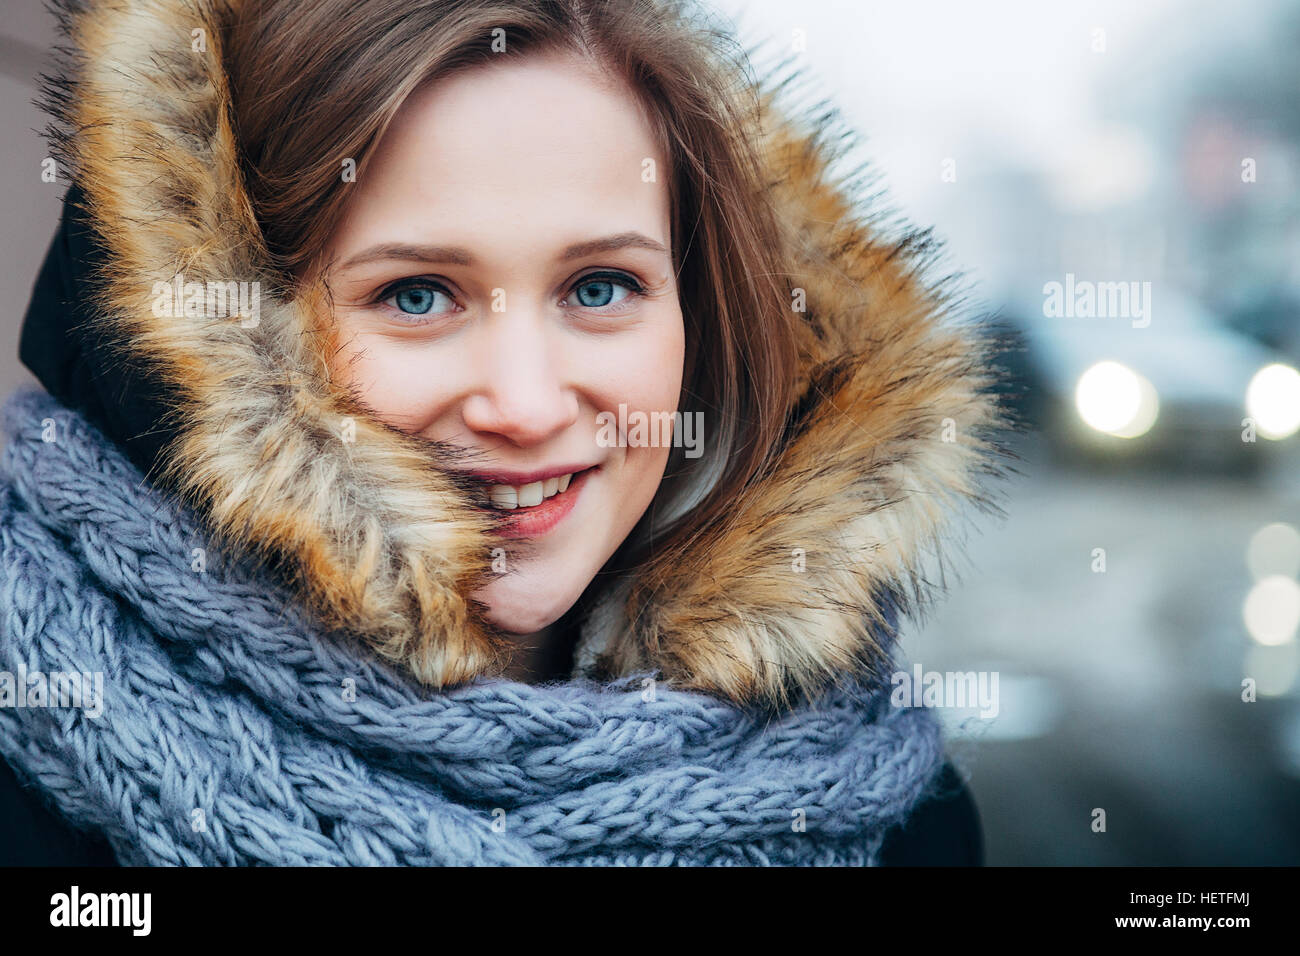 Young woman outdoor portrait horizontal Stock Photo